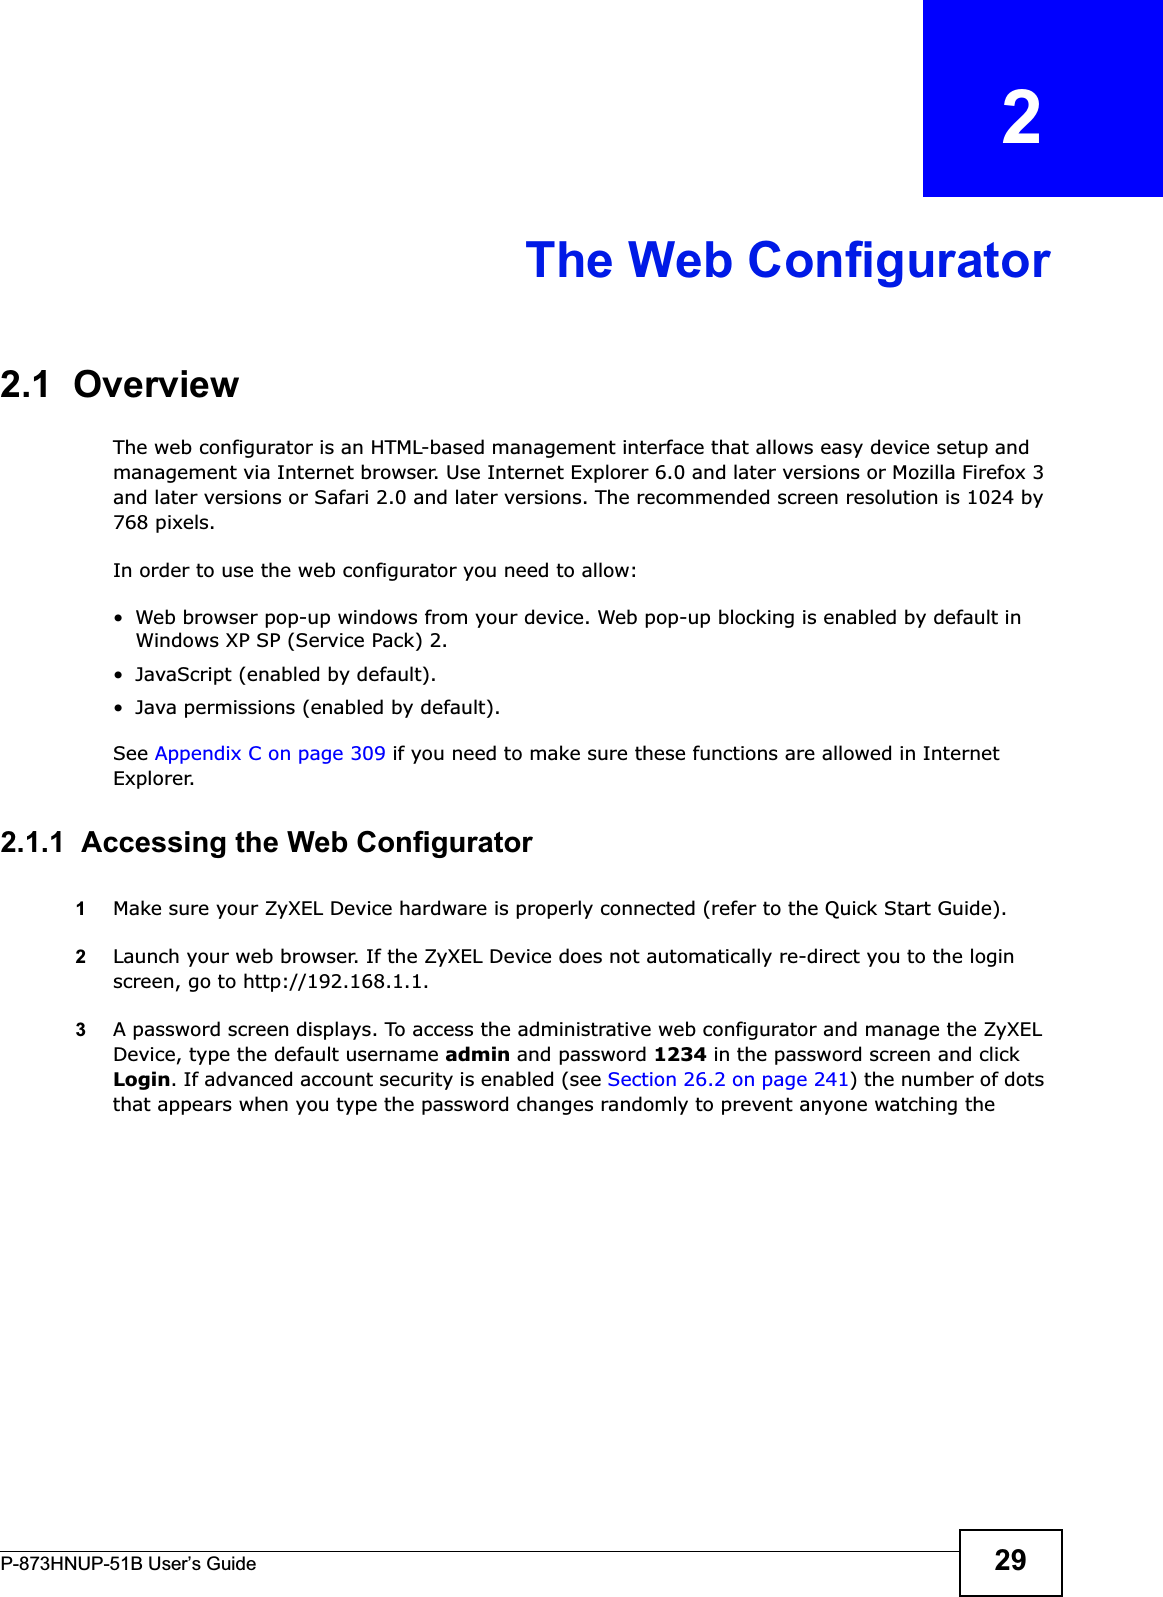 P-873HNUP-51B User’s Guide 29CHAPTER   2The Web Configurator2.1  OverviewThe web configurator is an HTML-based management interface that allows easy device setup and management via Internet browser. Use Internet Explorer 6.0 and later versions or Mozilla Firefox 3 and later versions or Safari 2.0 and later versions. The recommended screen resolution is 1024 by 768 pixels.In order to use the web configurator you need to allow:• Web browser pop-up windows from your device. Web pop-up blocking is enabled by default in Windows XP SP (Service Pack) 2.• JavaScript (enabled by default).• Java permissions (enabled by default).See Appendix C on page 309 if you need to make sure these functions are allowed in Internet Explorer. 2.1.1  Accessing the Web Configurator1Make sure your ZyXEL Device hardware is properly connected (refer to the Quick Start Guide).2Launch your web browser. If the ZyXEL Device does not automatically re-direct you to the login screen, go to http://192.168.1.1.3A password screen displays. To access the administrative web configurator and manage the ZyXEL Device, type the default username admin and password 1234 in the password screen and click Login. If advanced account security is enabled (see Section 26.2 on page 241) the number of dots that appears when you type the password changes randomly to prevent anyone watching the 